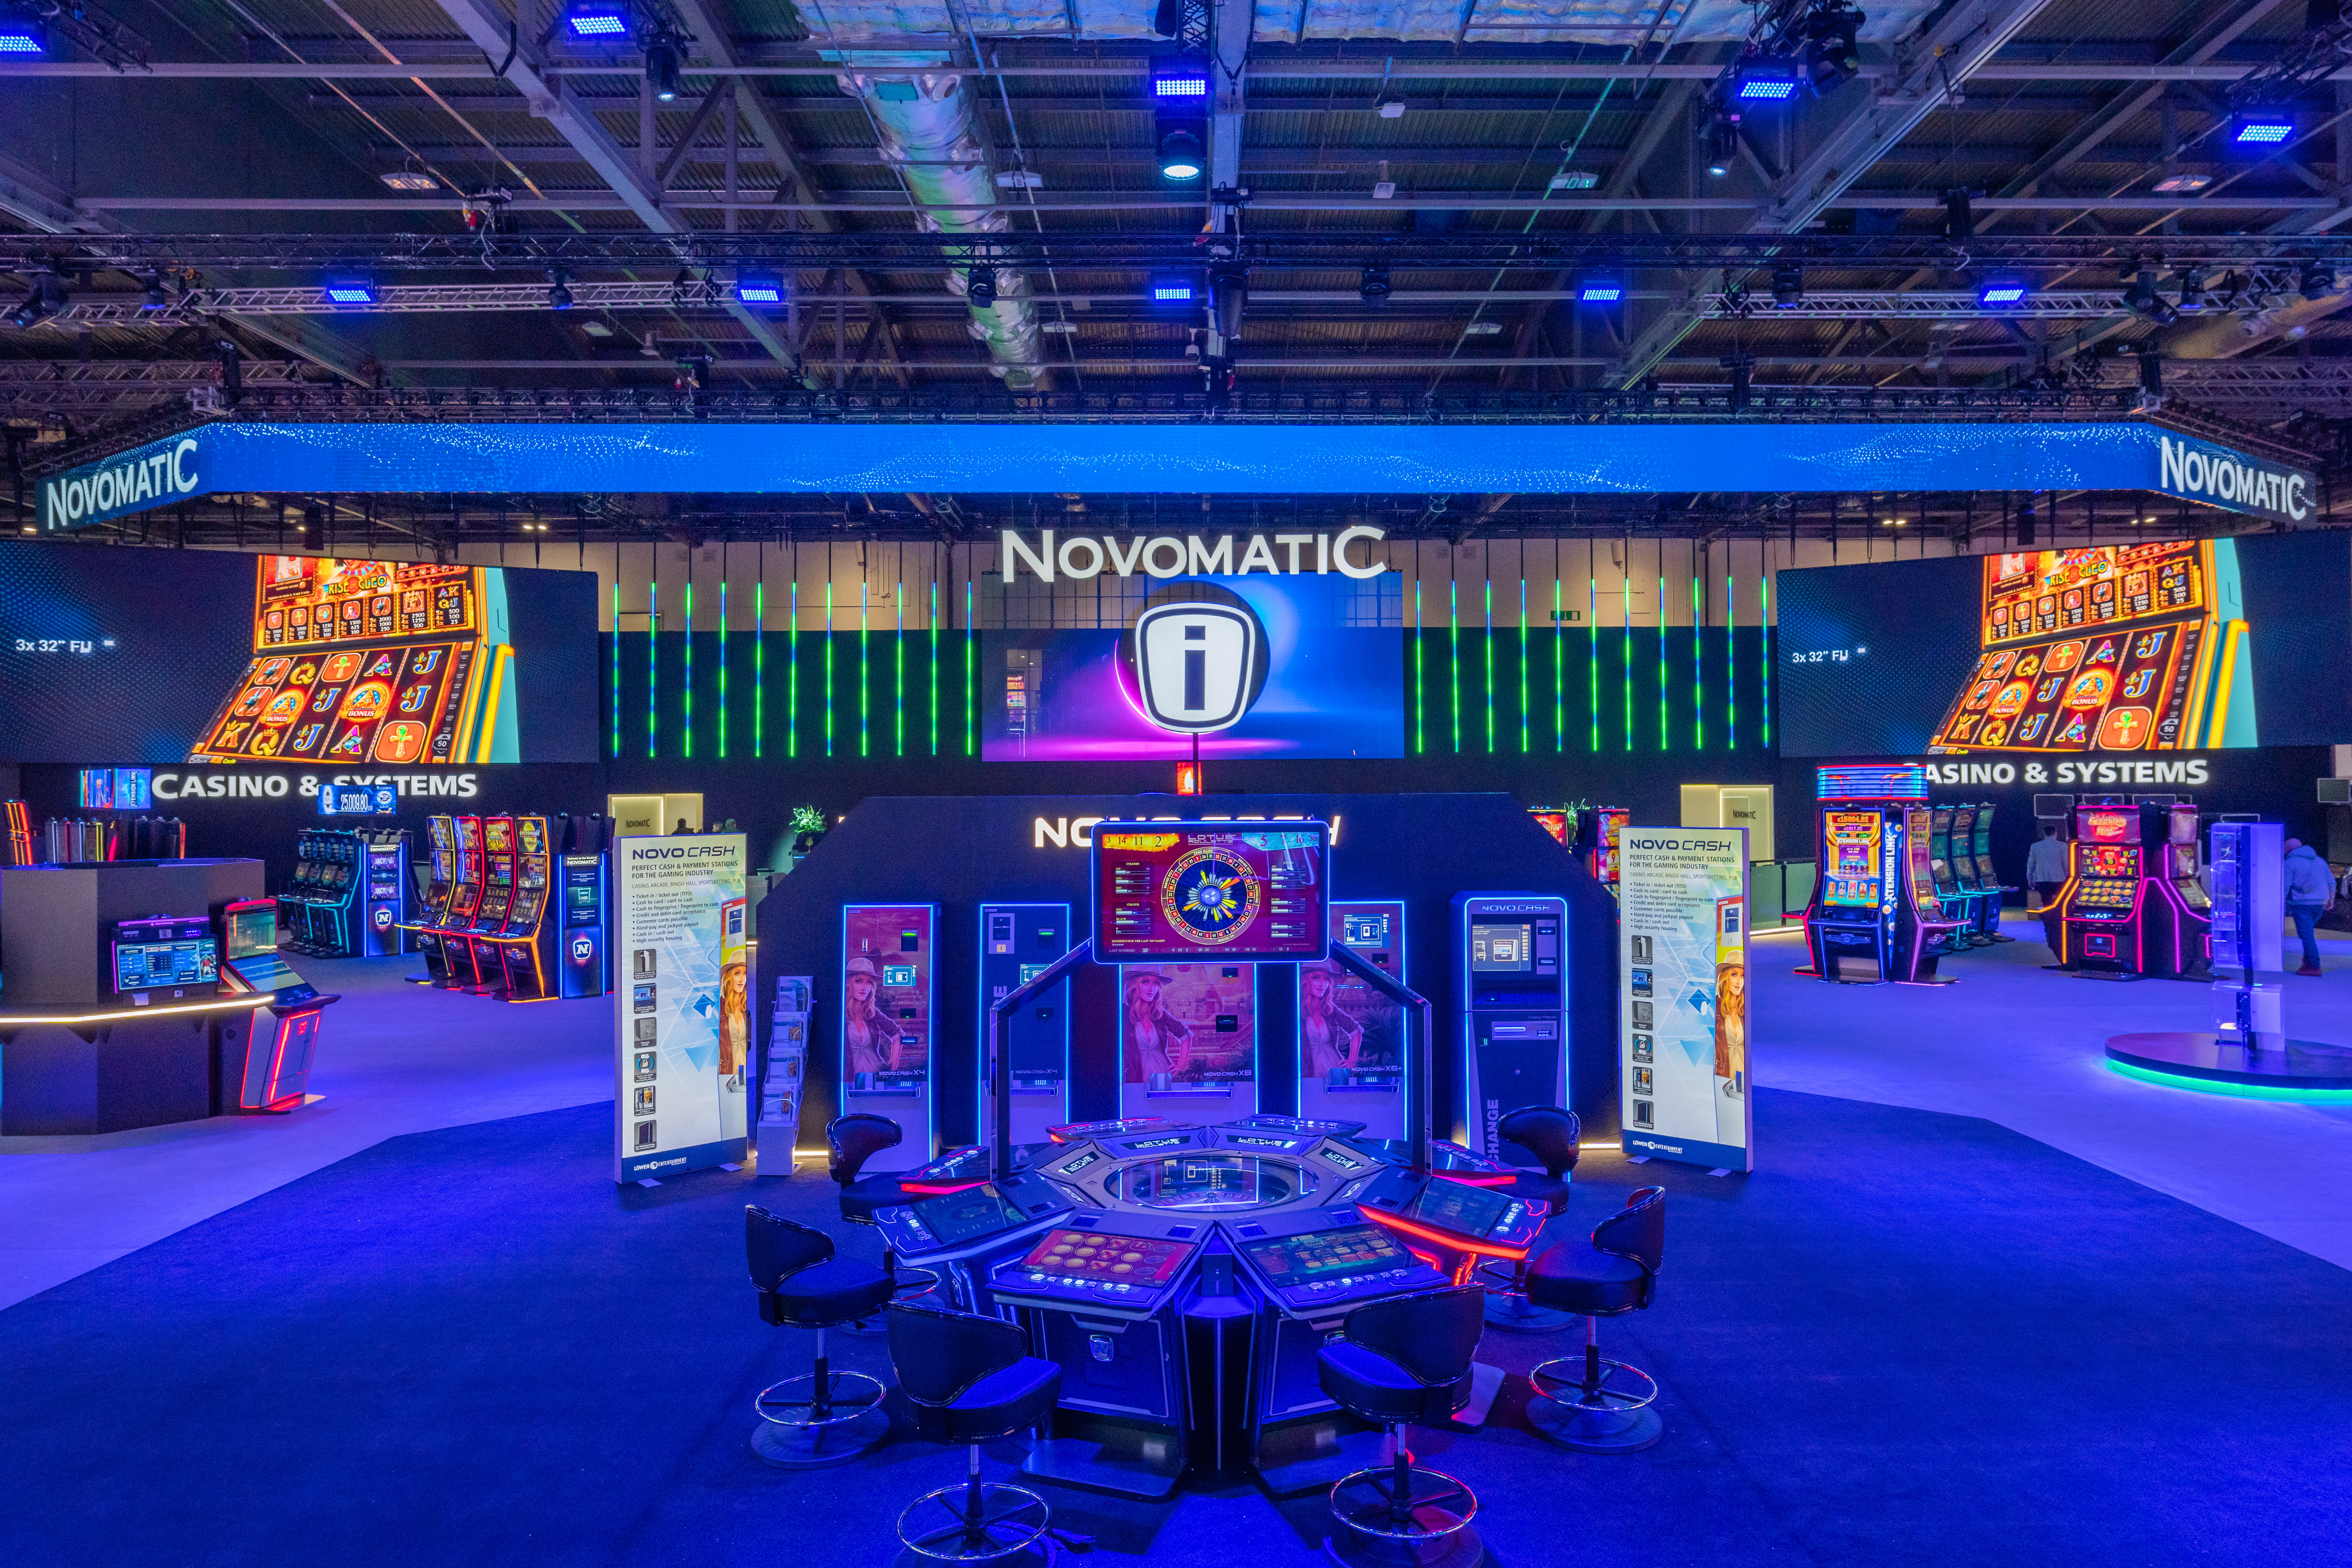 Global Gaming Awards 2022 Asia: NOVOMATIC wins category “Table Game of the  Year”